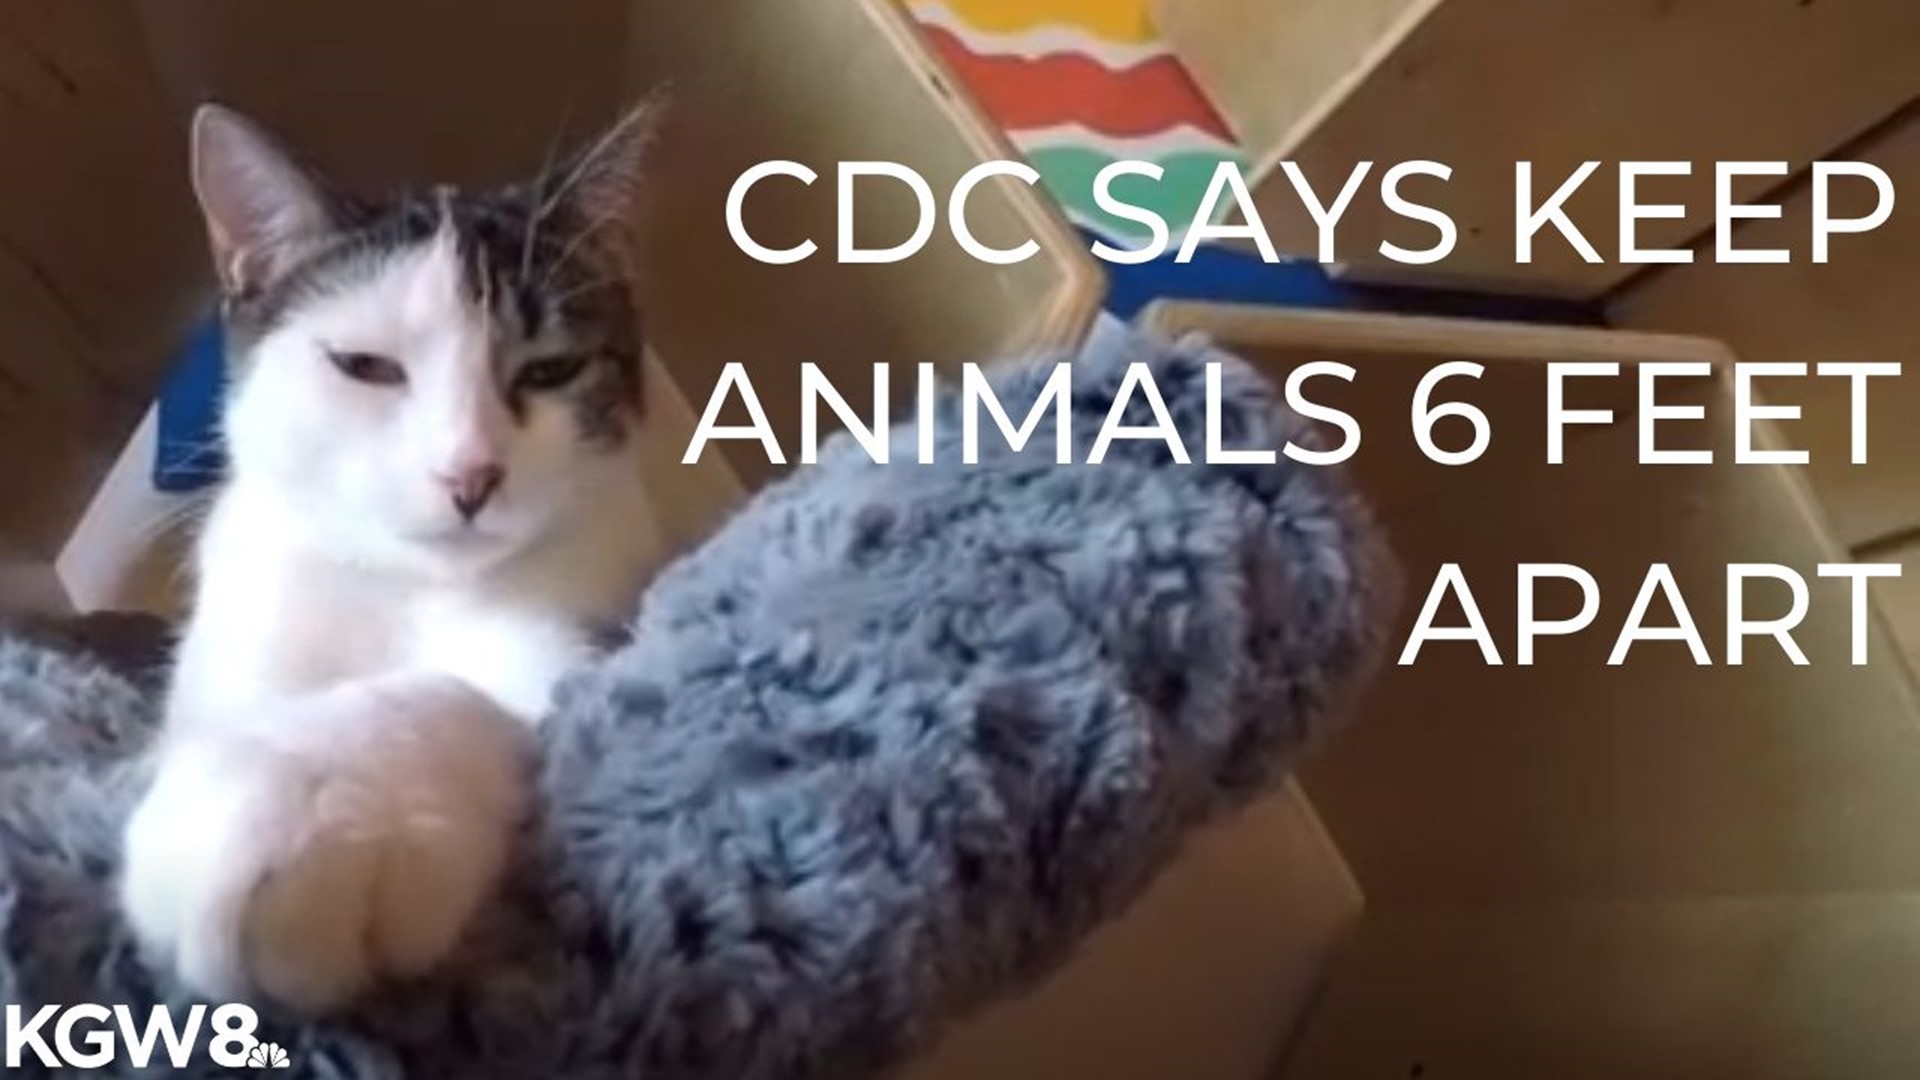 Protect yourself and your pets: CDC says keep animals 6 feet apart 